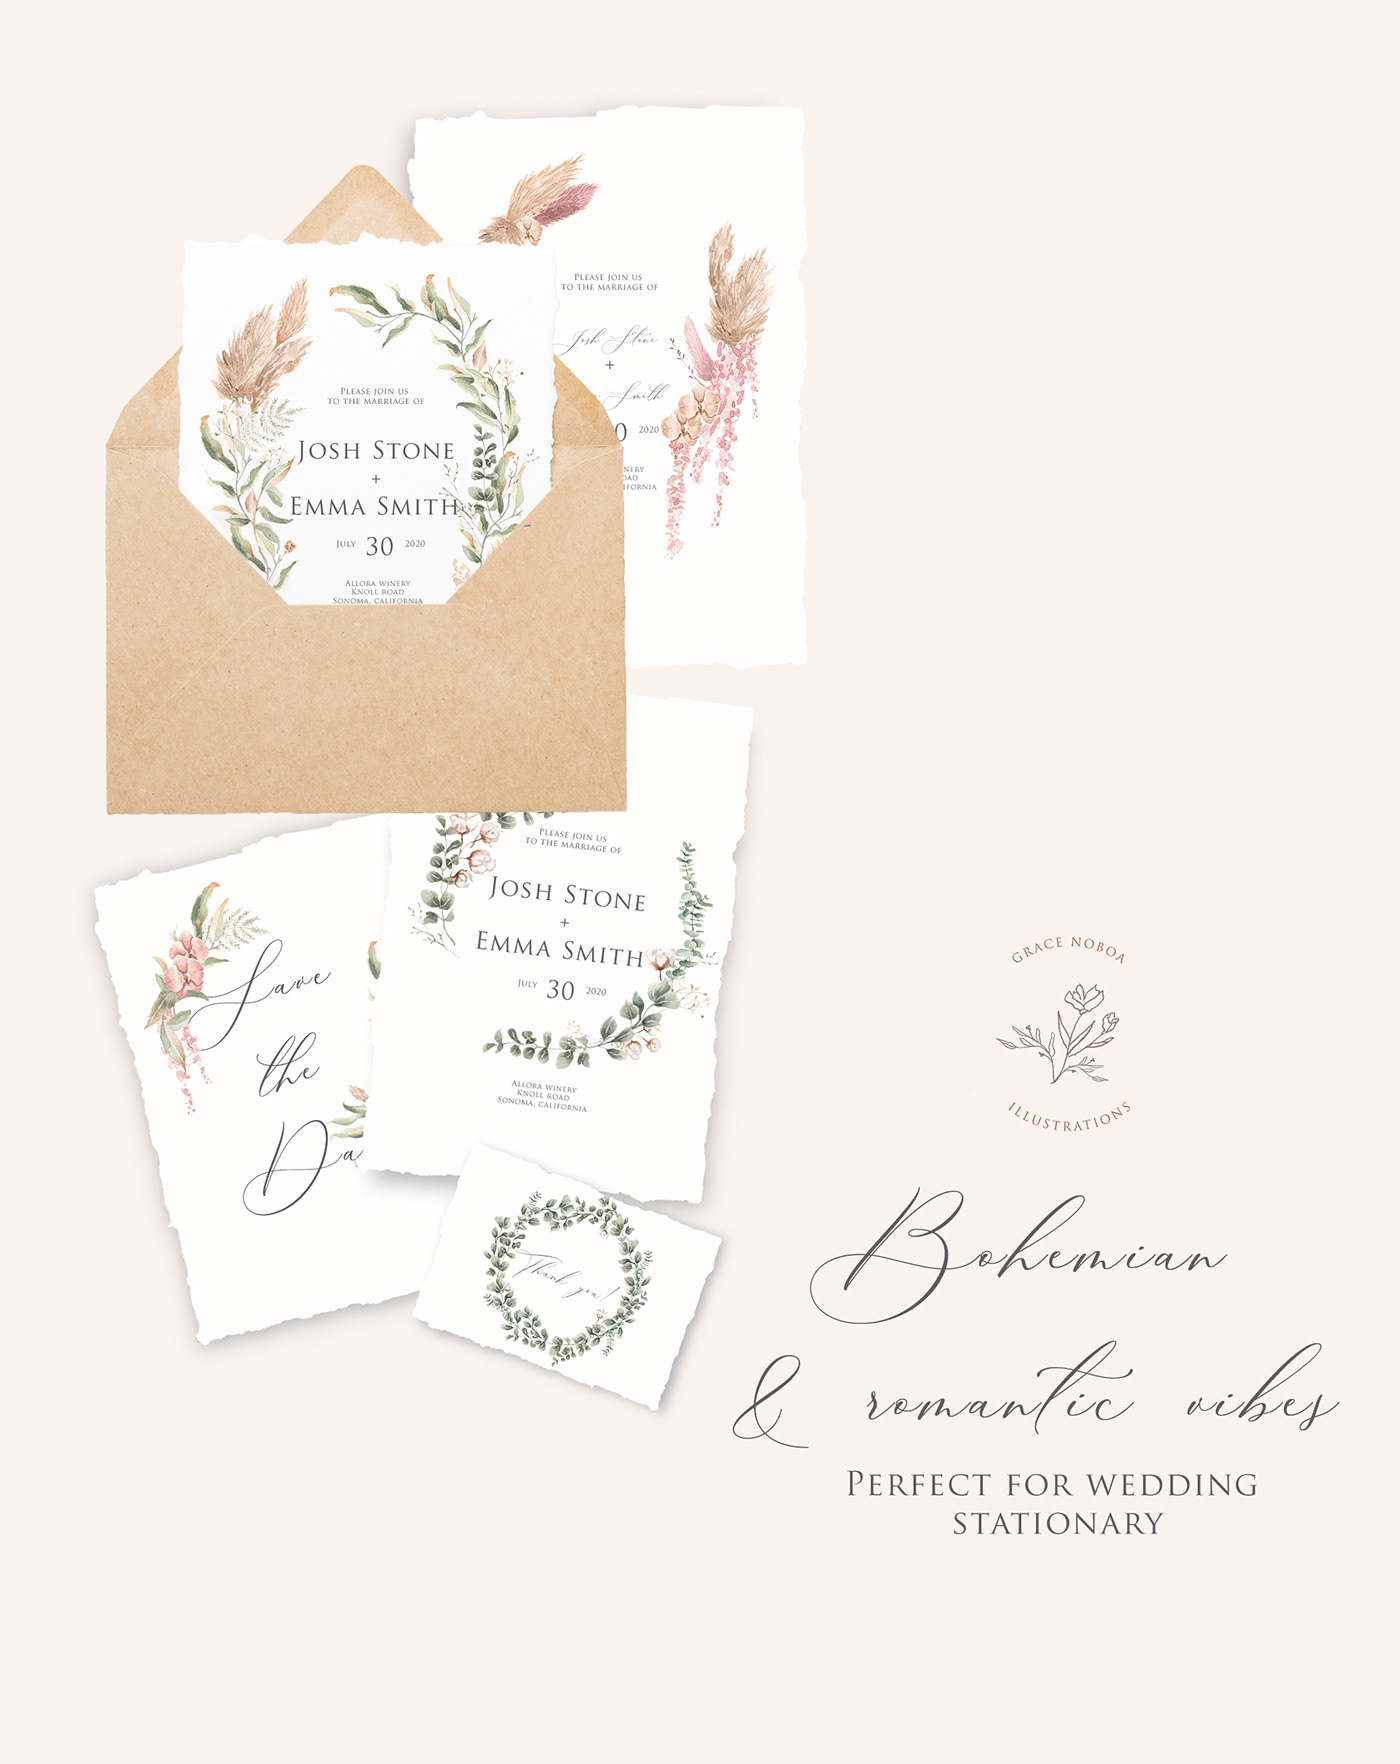 bohemian boho clipart Collection etsy greenery pampa grass png files trend watercolor